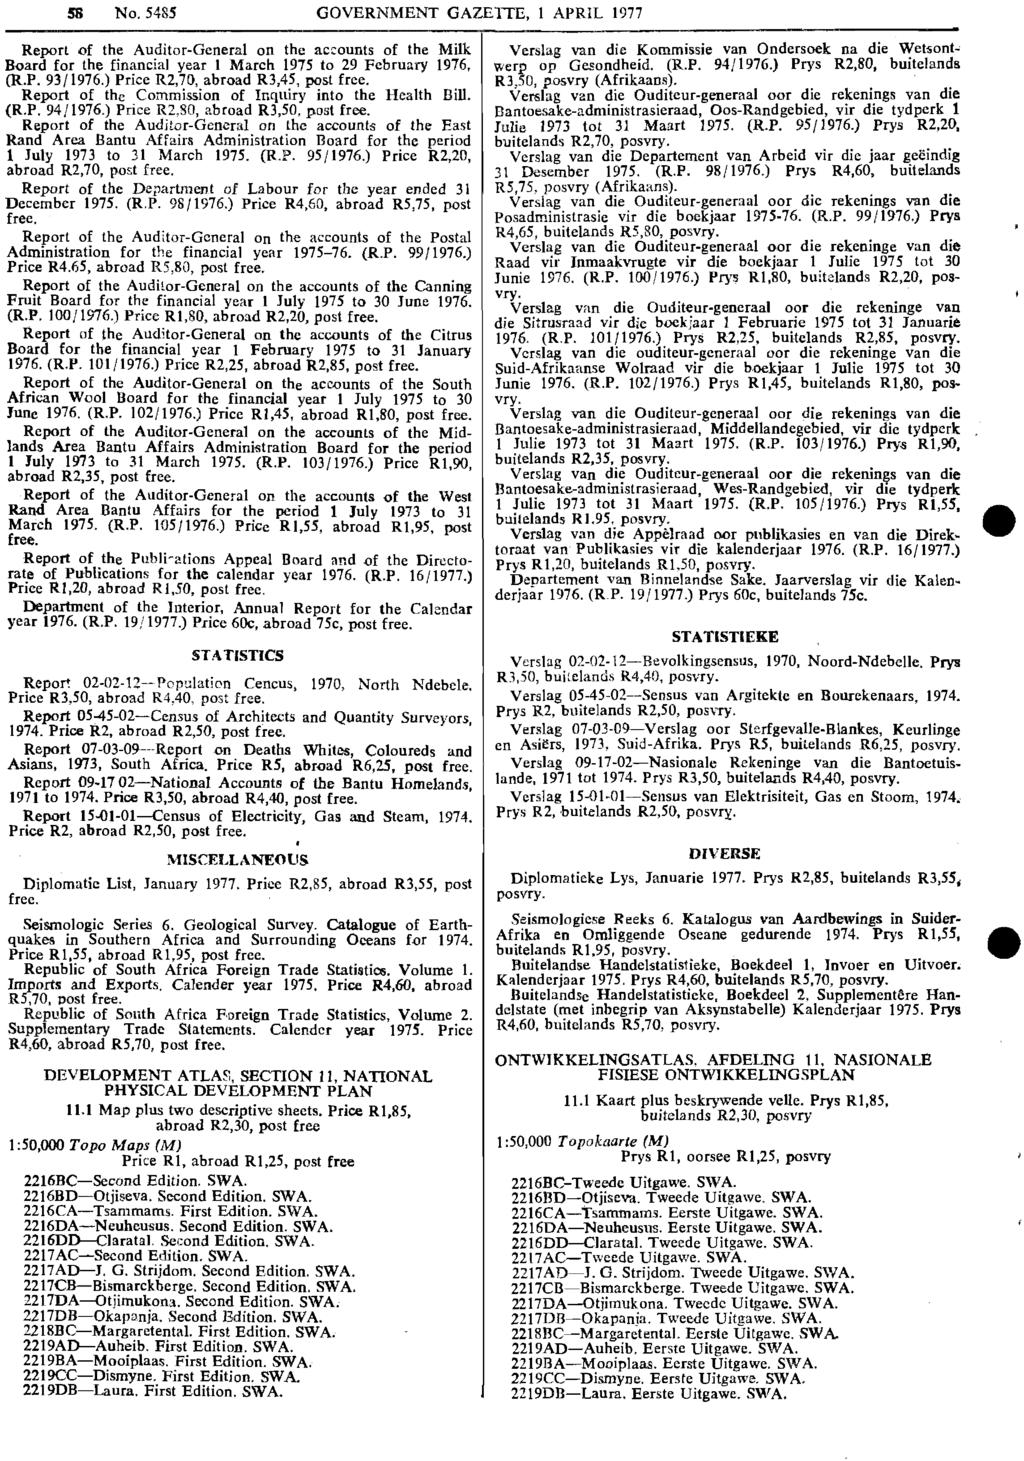 58 No. 5485 GOVERNMENT GAZETTE, 1 APRIL 1977 Report of the Auditor-General on the ac~ounts of the Milk Board for the financial year 1 March 1975 to 29 February 1976, CR.P. 93/1976.